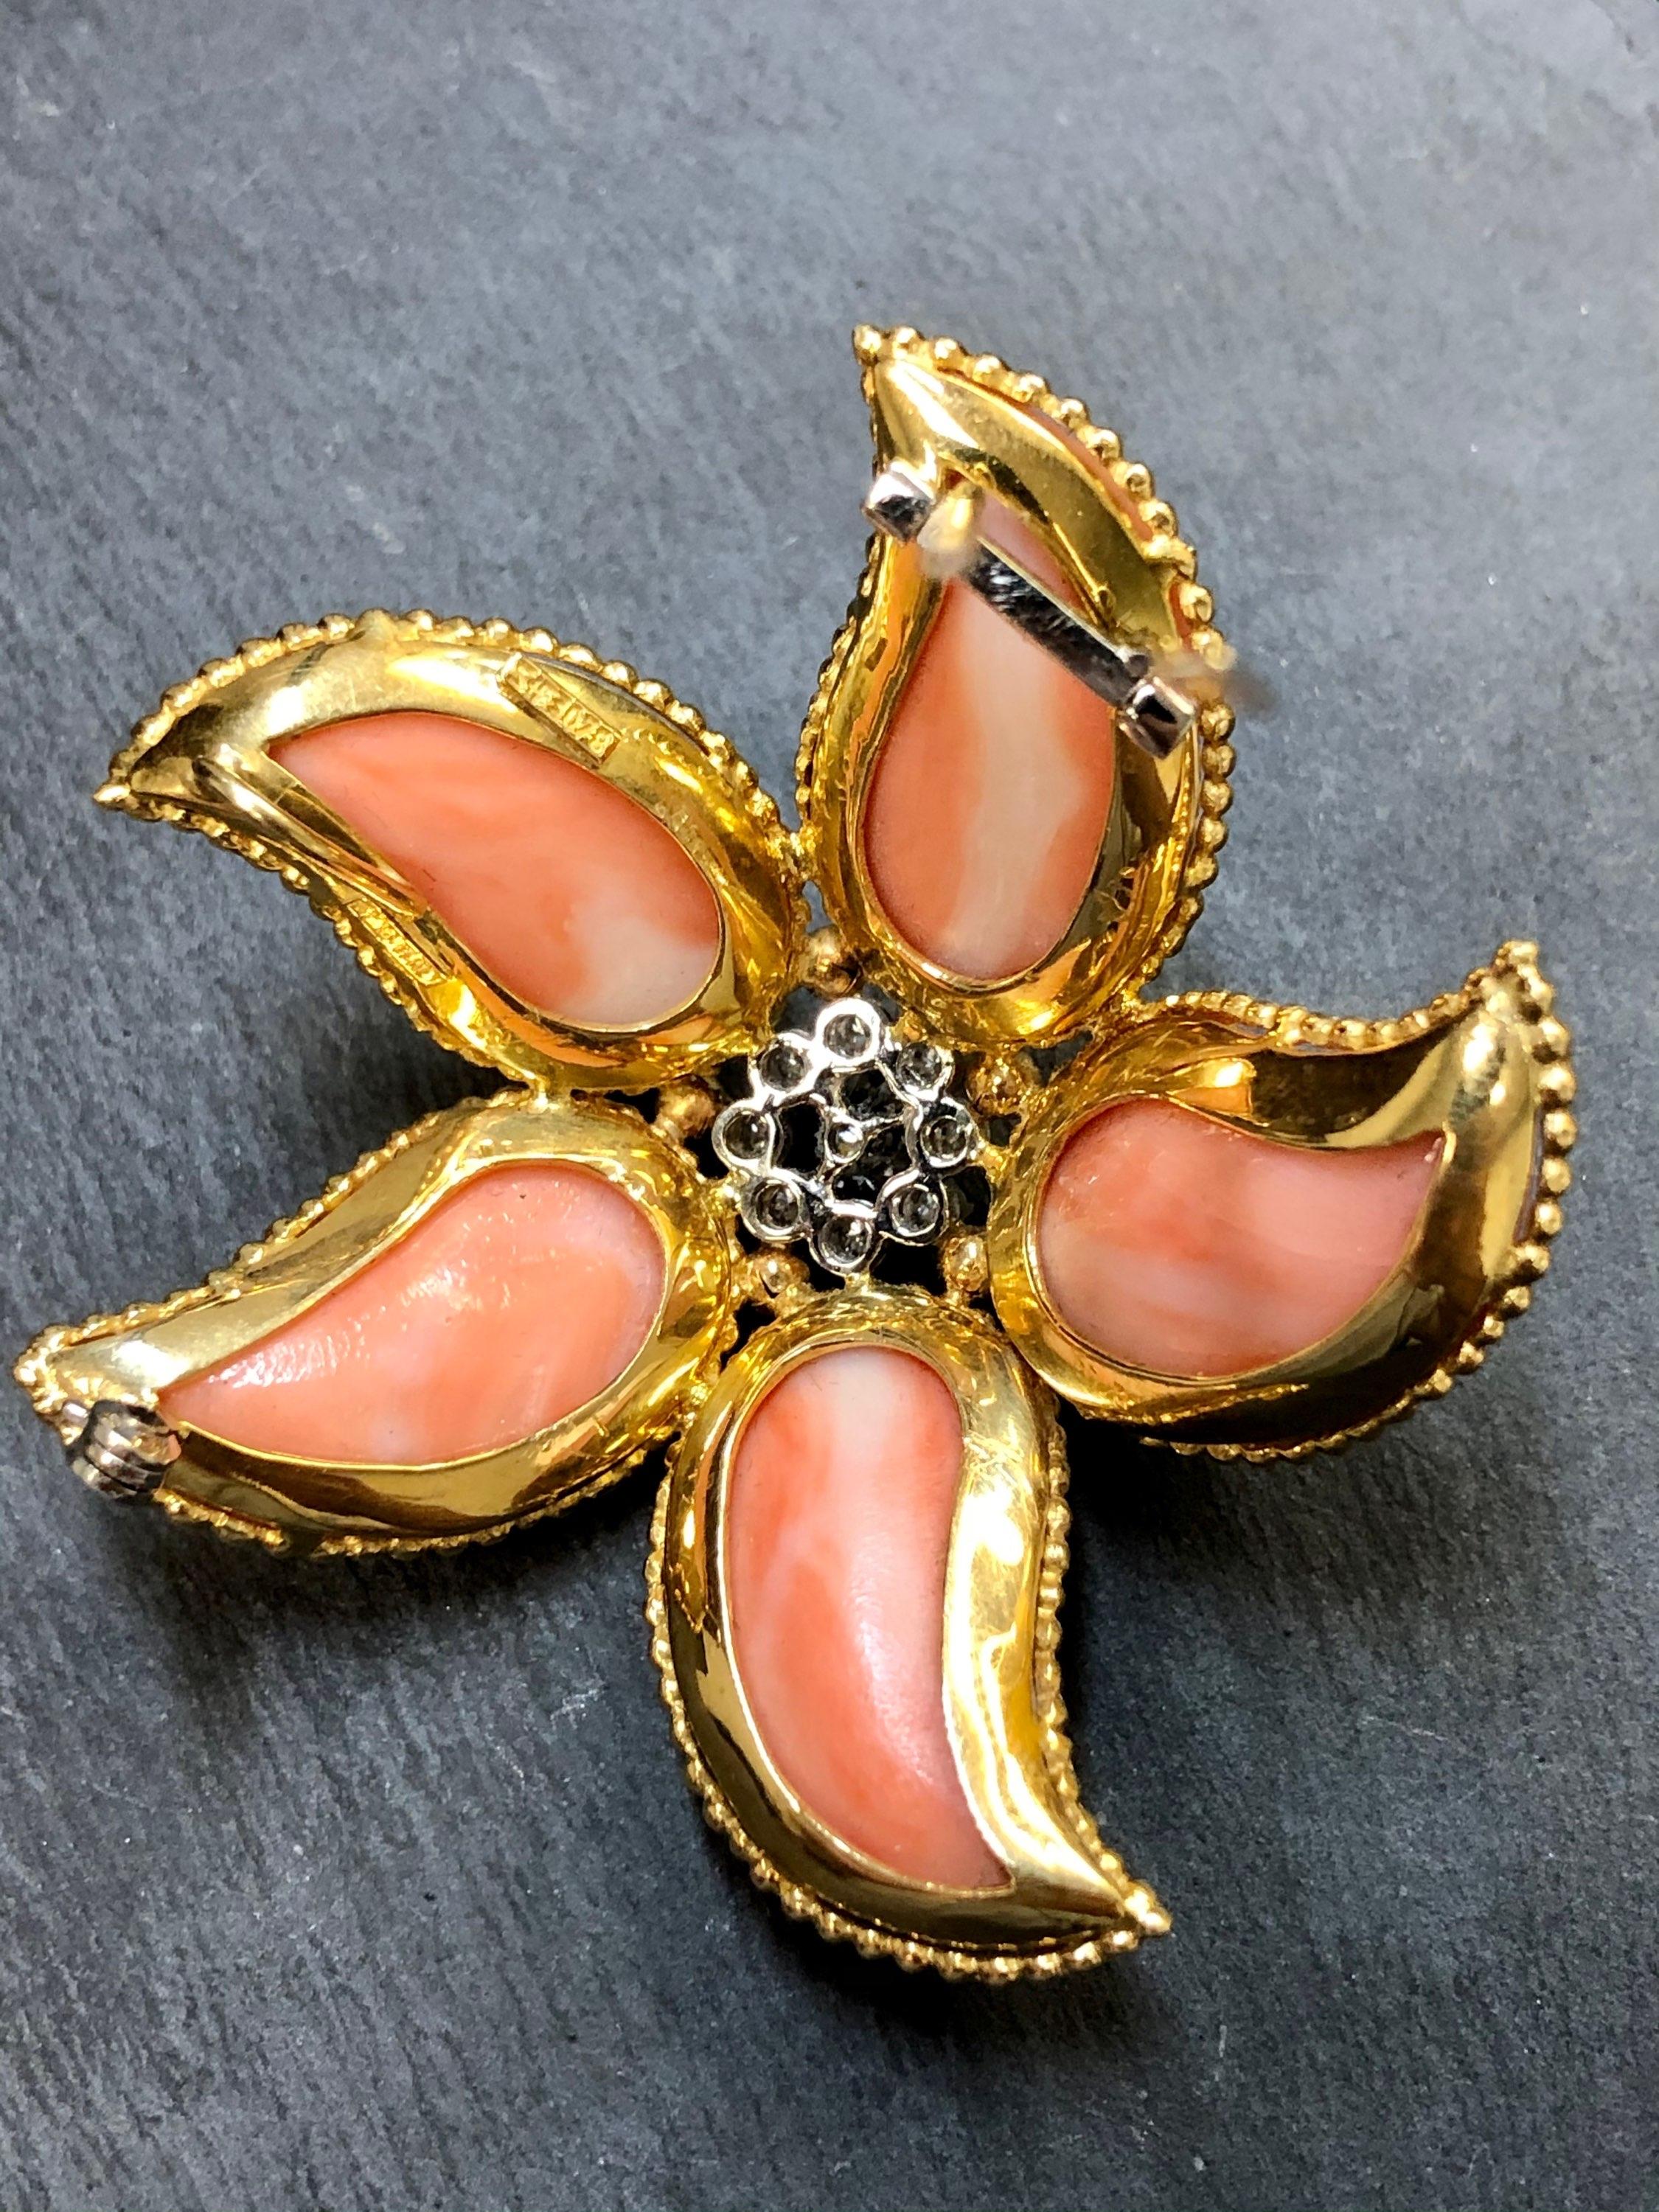 A large brooch done in 18K yellow gold and platinum circa 1960’s done in polished coral and approximately .60cttw in diamonds. By Spitzer & Furman.

Dimensions /Weight
Just over 2 1/4” in diameter. Weighs 23.8dwt.

Condition
No damage to coral and